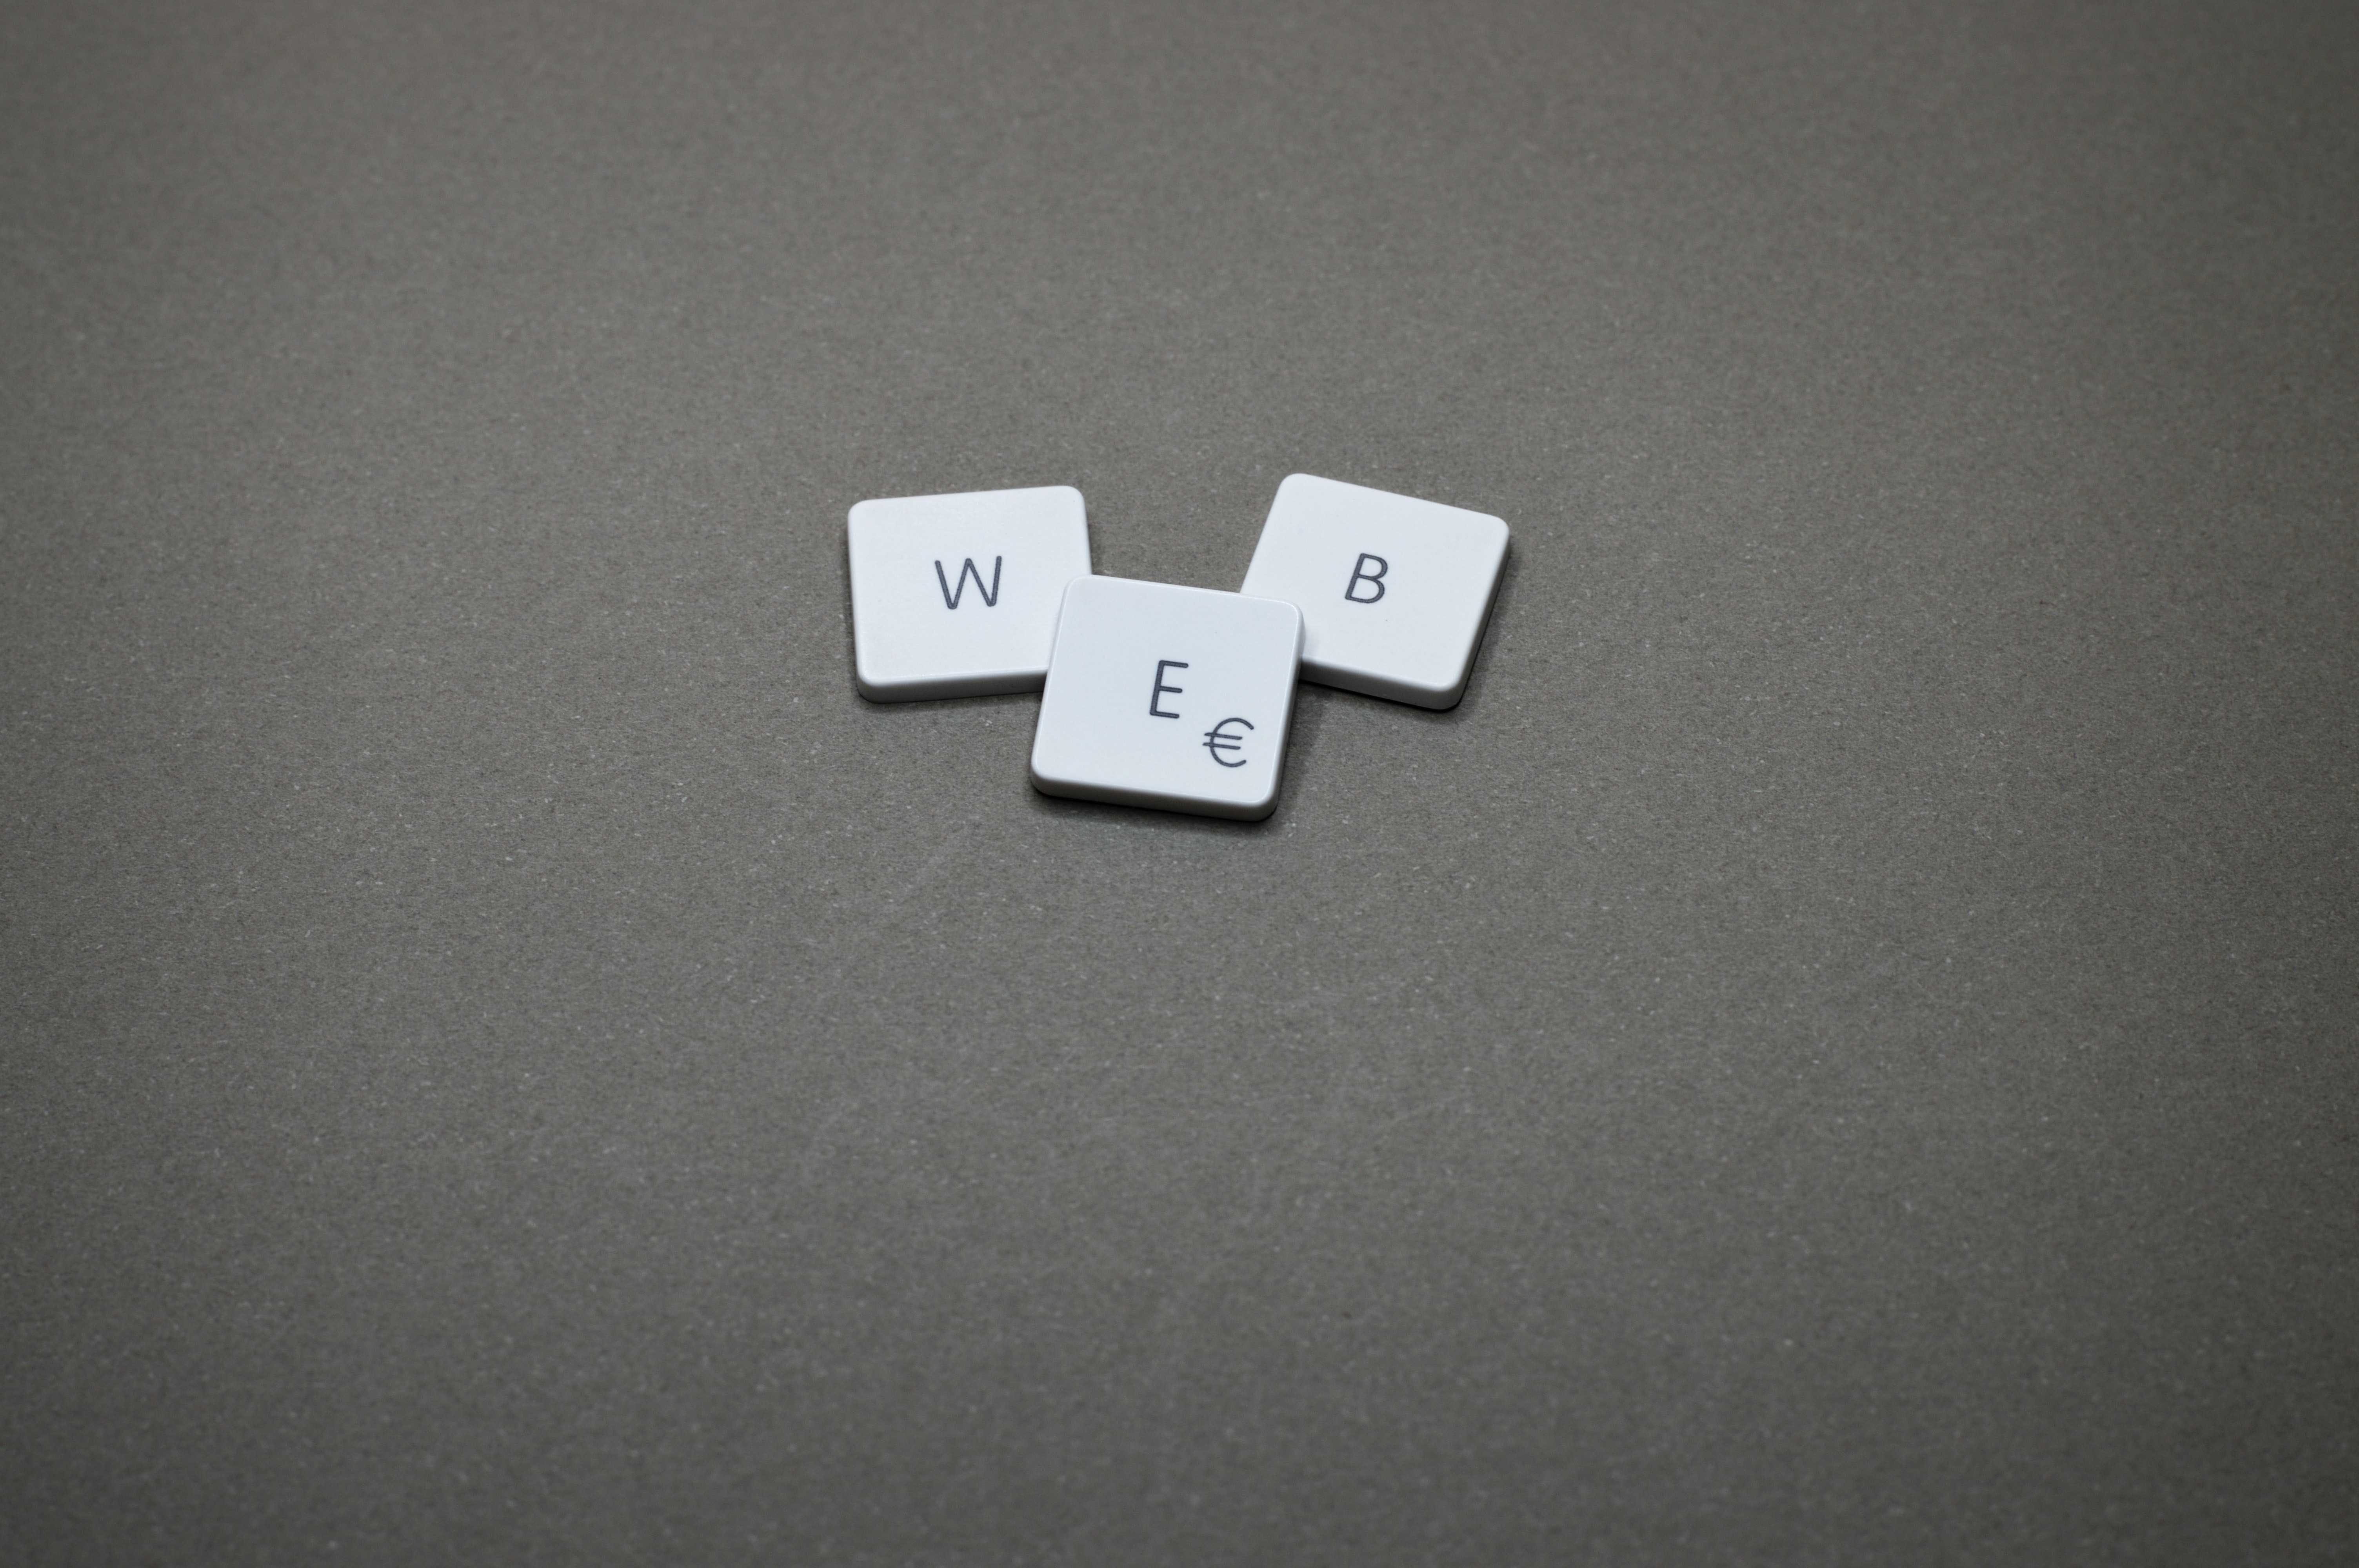 Web 3.0: what it is and how the new era of the Internet affects software development